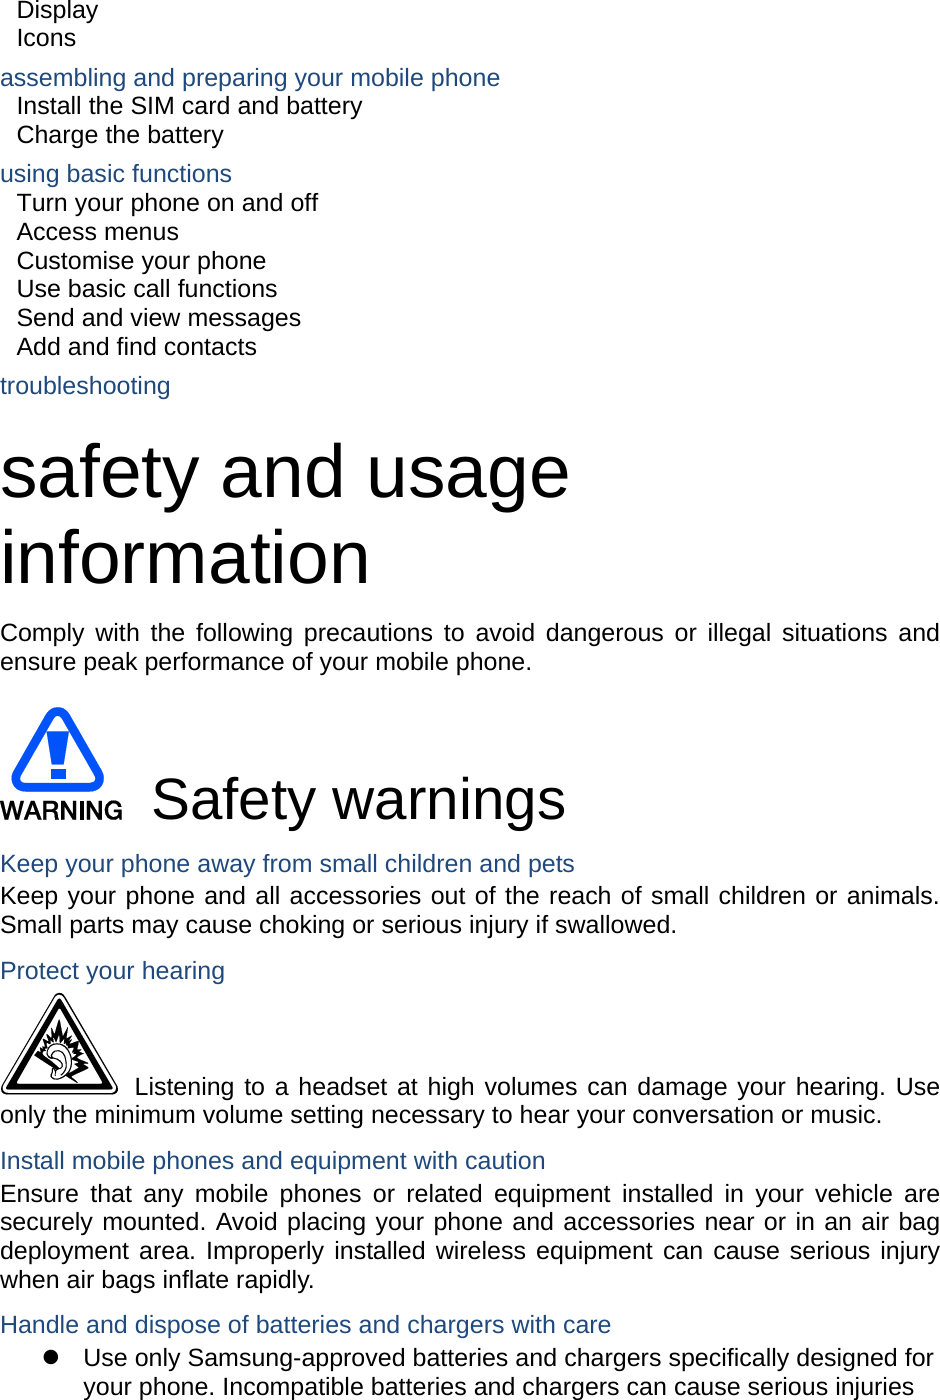 Display  Icons assembling and preparing your mobile phone     Install the SIM card and battery     Charge the battery     using basic functions    Turn your phone on and off    Access menus     Customise your phone     Use basic call functions     Send and view messages     Add and find contacts     troubleshooting     safety and usage information  Comply with the following precautions to avoid dangerous or illegal situations and ensure peak performance of your mobile phone.   Safety warnings Keep your phone away from small children and pets Keep your phone and all accessories out of the reach of small children or animals. Small parts may cause choking or serious injury if swallowed. Protect your hearing  Listening to a headset at high volumes can damage your hearing. Use only the minimum volume setting necessary to hear your conversation or music. Install mobile phones and equipment with caution Ensure that any mobile phones or related equipment installed in your vehicle are securely mounted. Avoid placing your phone and accessories near or in an air bag deployment area. Improperly installed wireless equipment can cause serious injury when air bags inflate rapidly. Handle and dispose of batteries and chargers with care z  Use only Samsung-approved batteries and chargers specifically designed for your phone. Incompatible batteries and chargers can cause serious injuries 